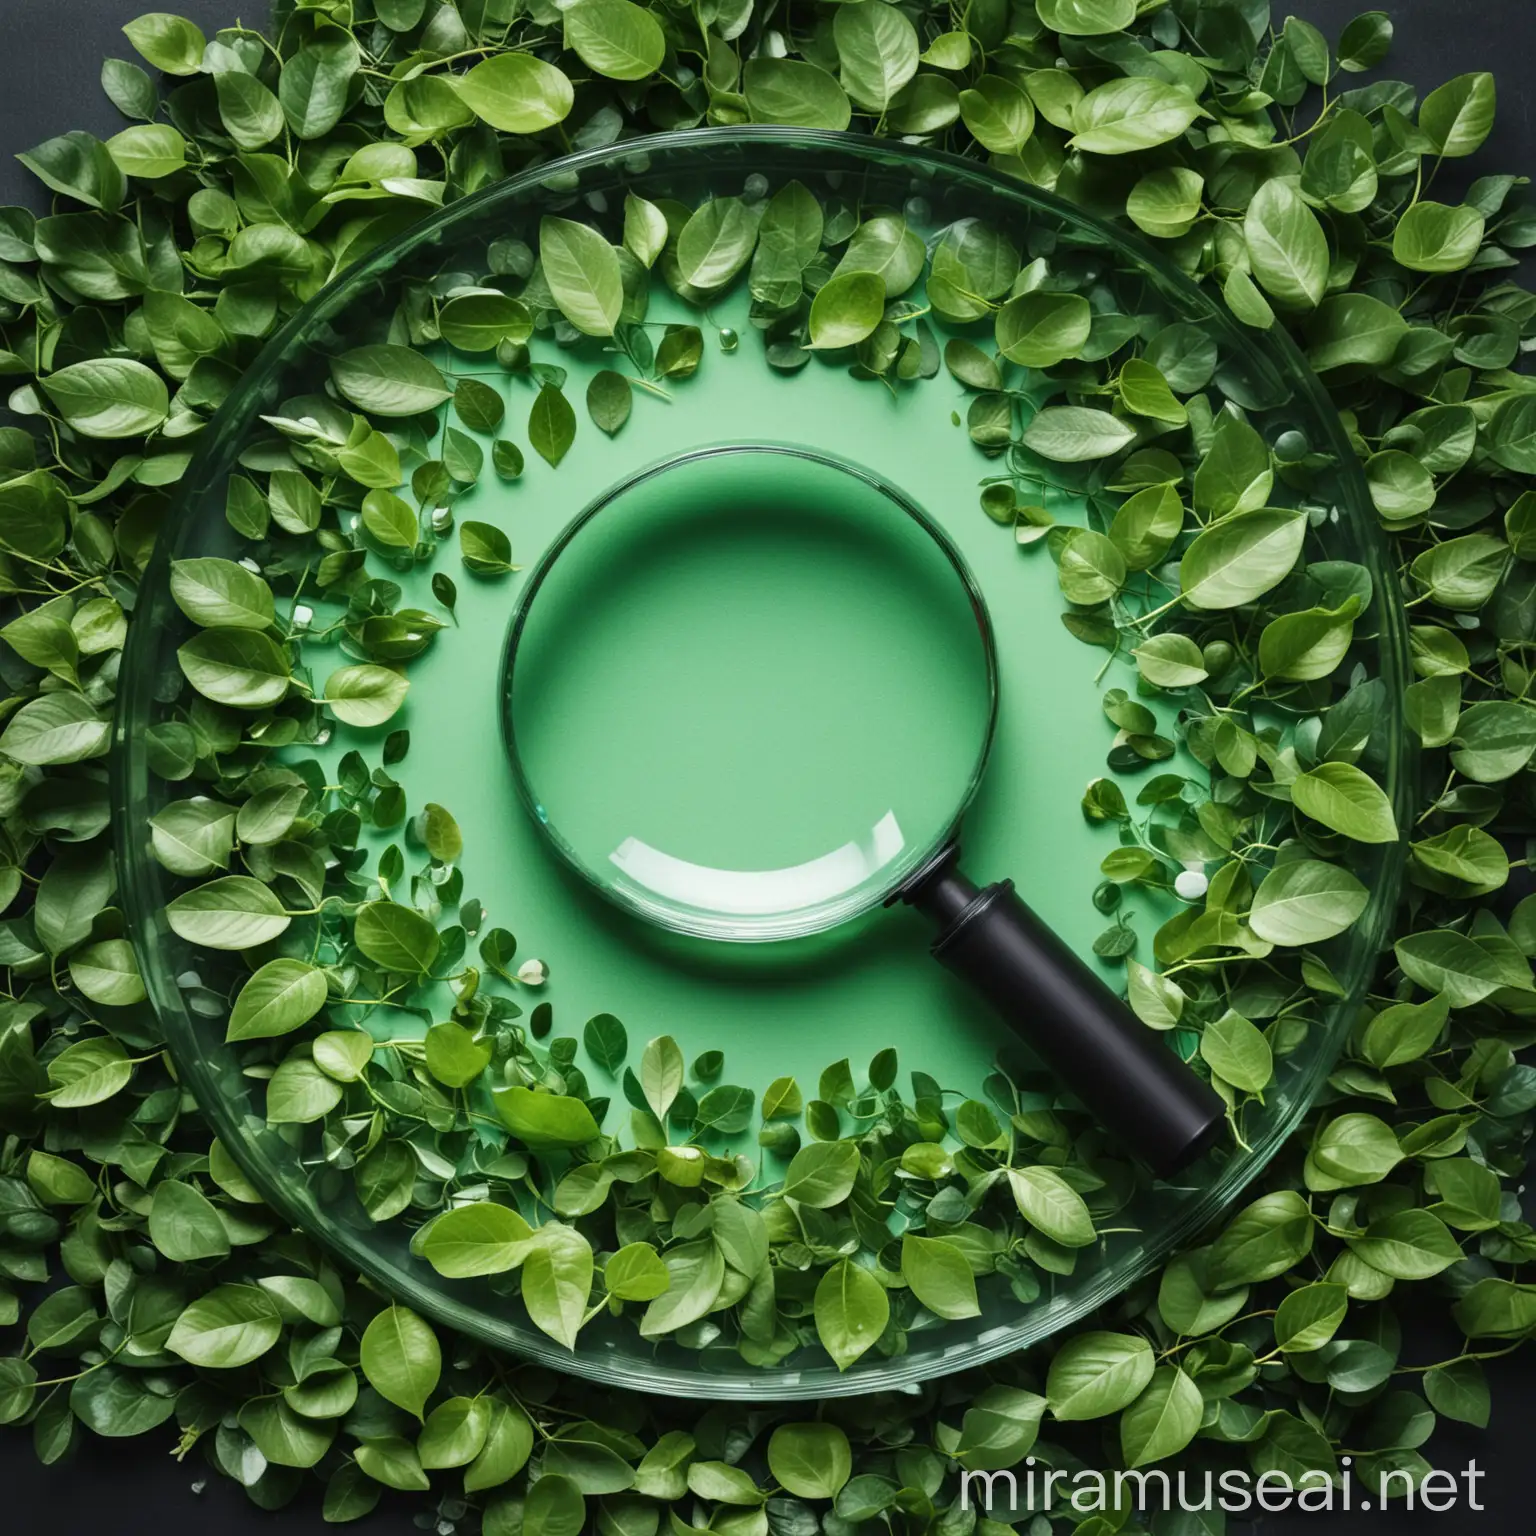 Magnifying glass in the center, test tube next to the magnifying glass, background light green, many small leaves in a circle